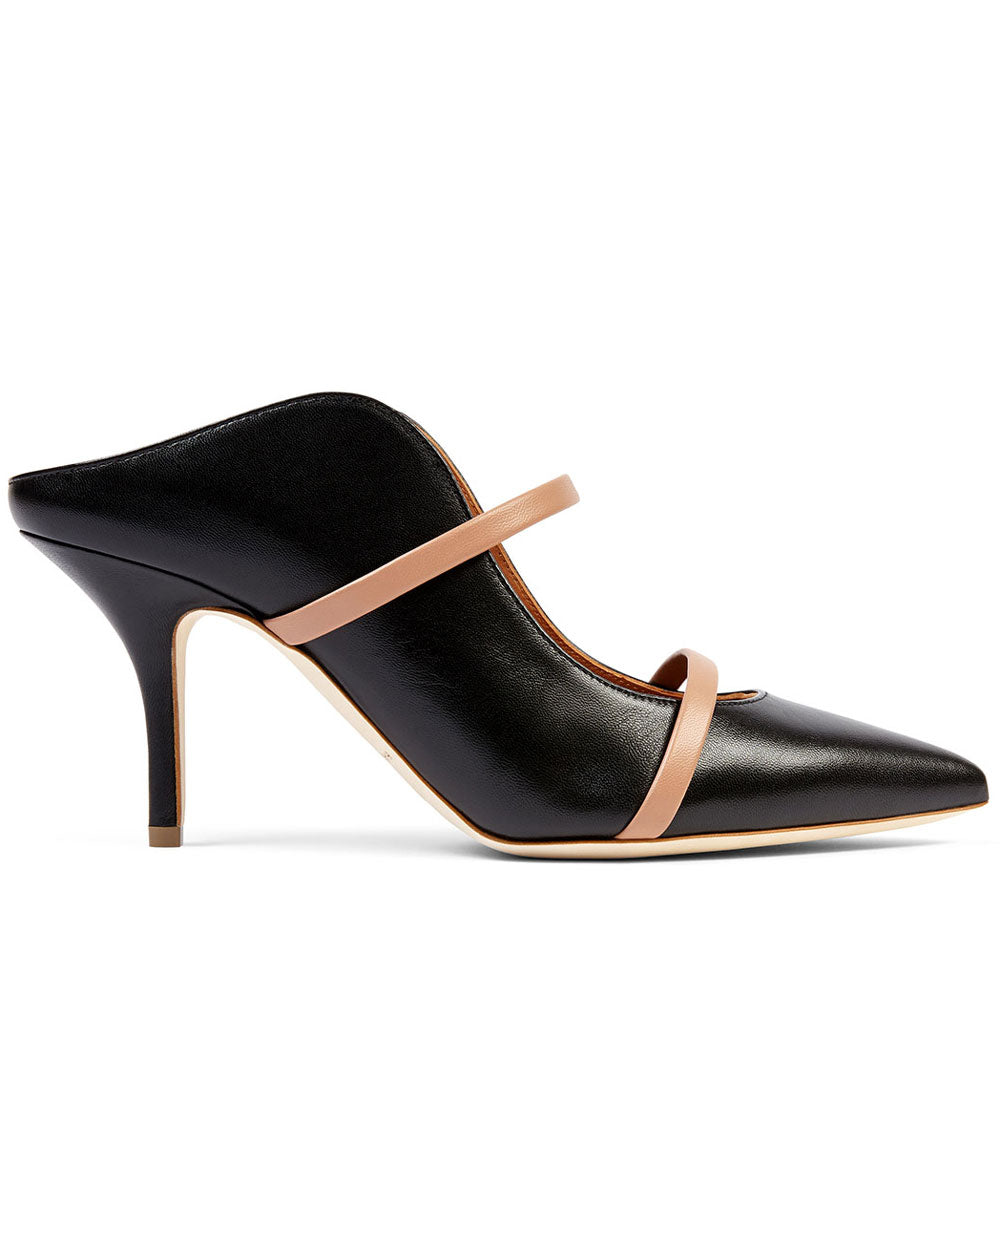 Maureen 70 Pump in Black and Nude